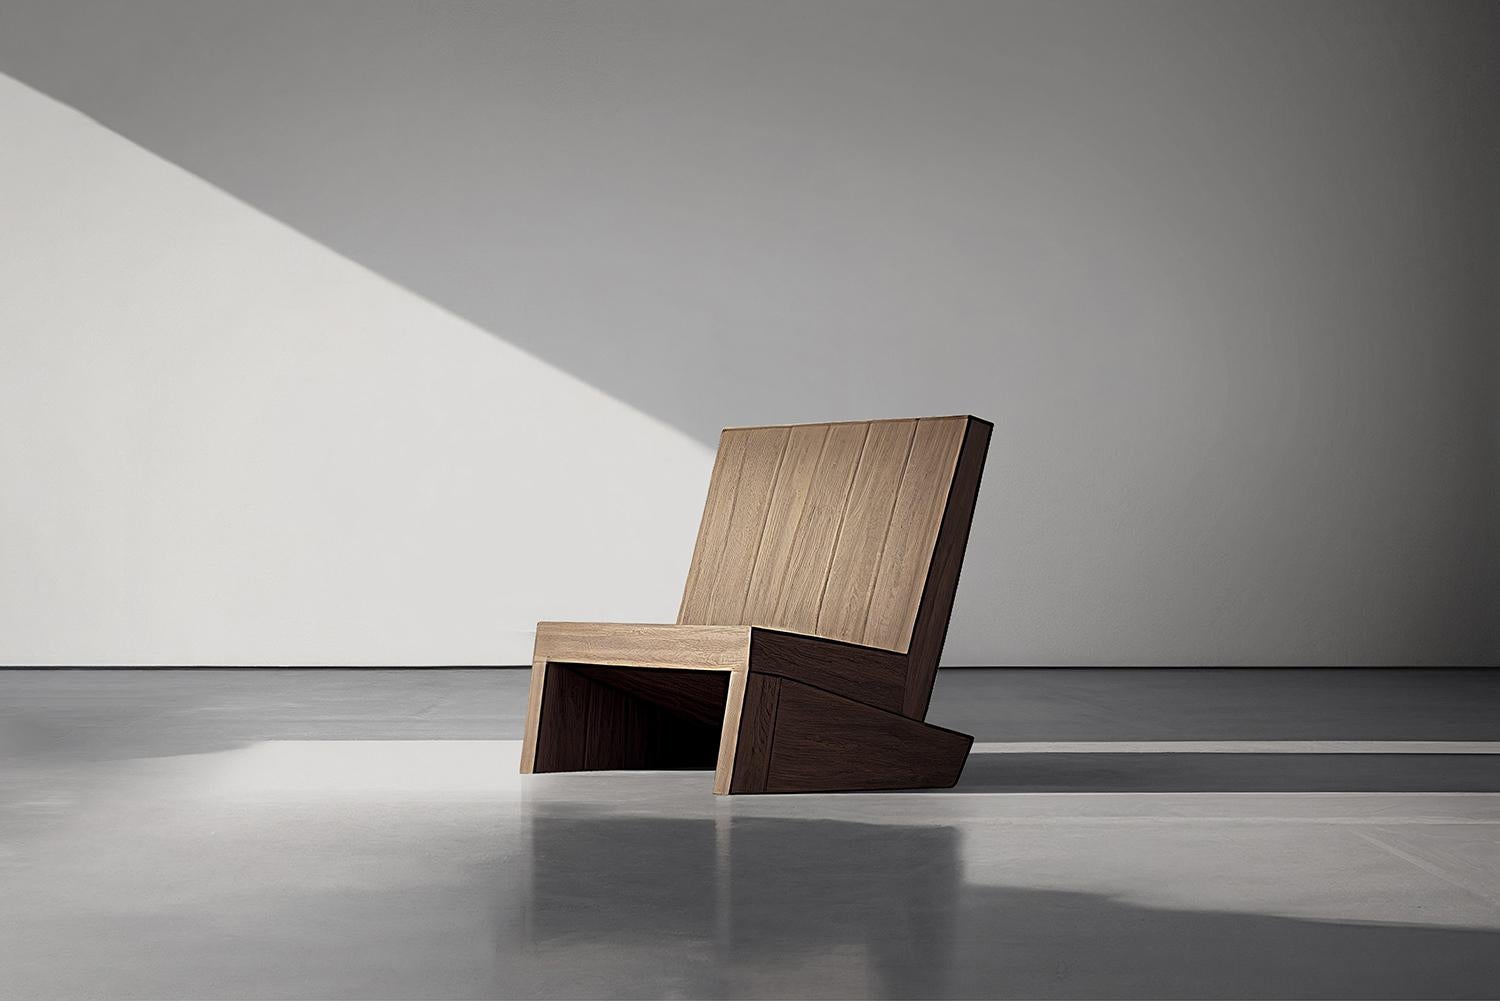 Minimalist Brutalist Lounge chair, Burn Oak Wood Muted Easy Chair by NONO 

Brutalist chairs boast a strong, yet passive presence with Minimalist designs that highlight the rich textures of natural oak wood. The goal was to showcase the beauty and